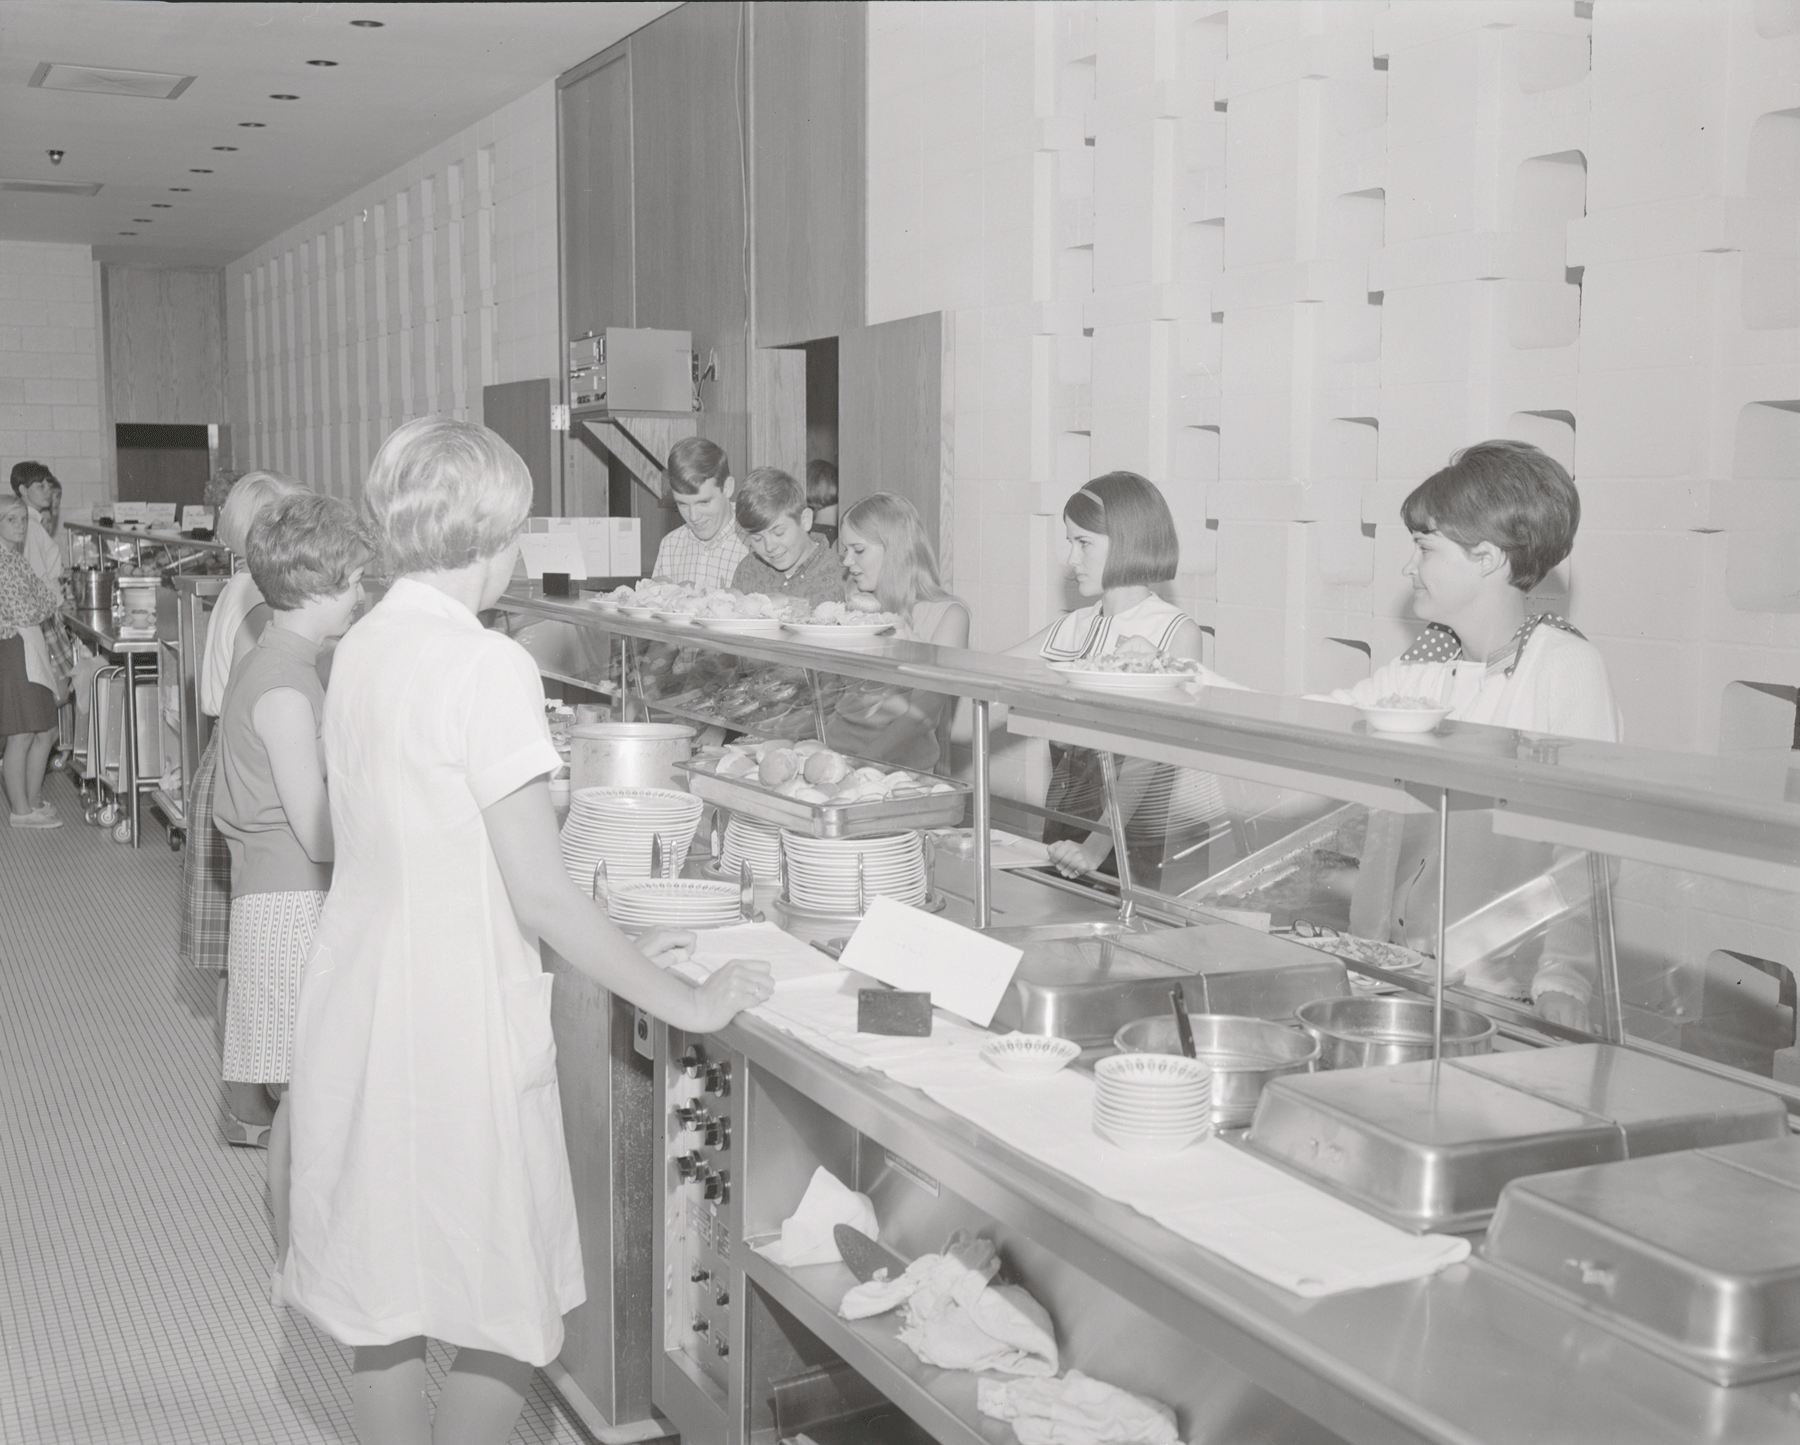 A black and white image of people getting food from a buffet line